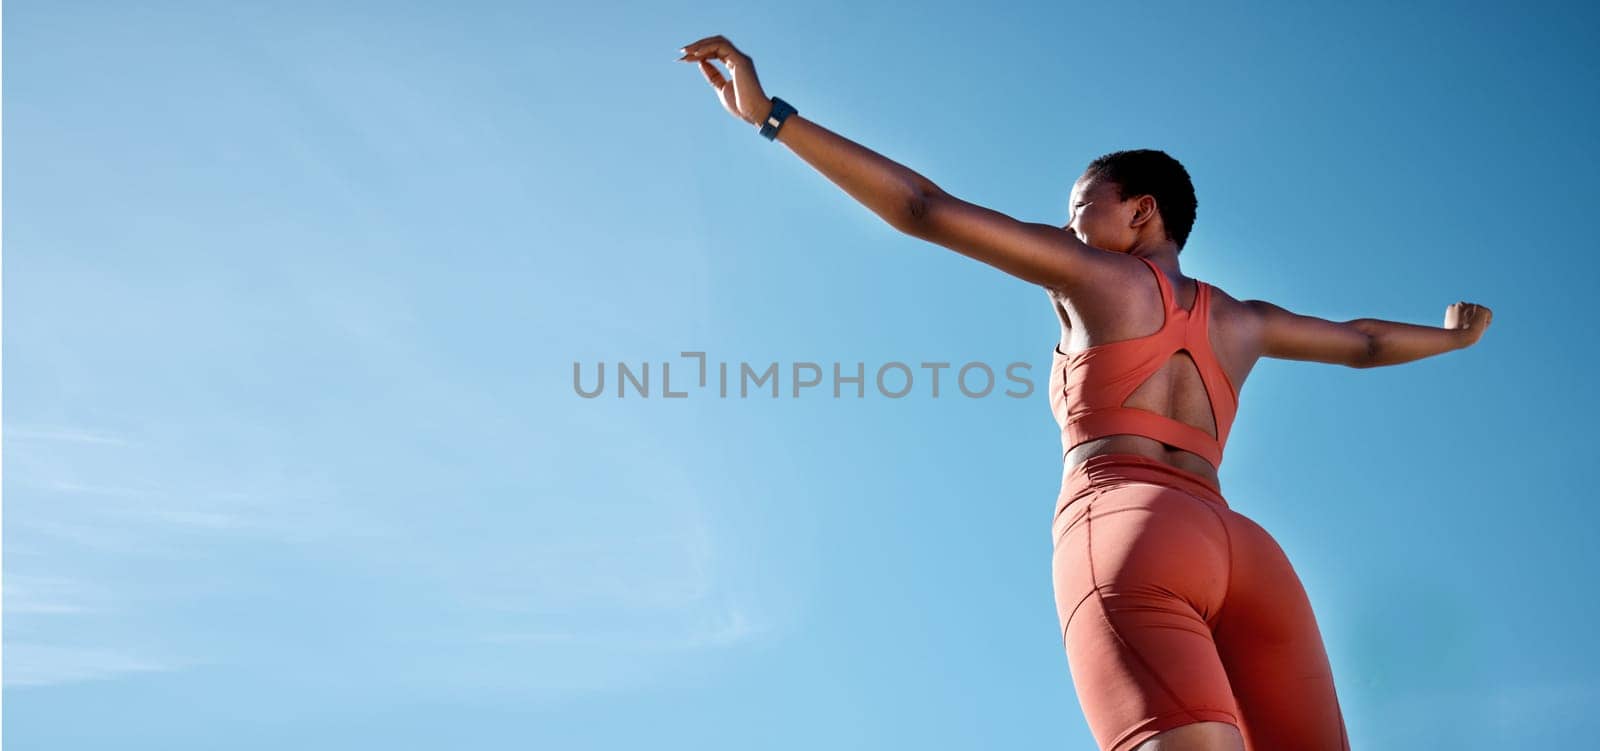 Woman, arms up or fitness success on blue sky background in workout, training or exercise goals for healthcare or cardiovascular wellness. Low angle runner, sports athlete or hands raised with mockup.